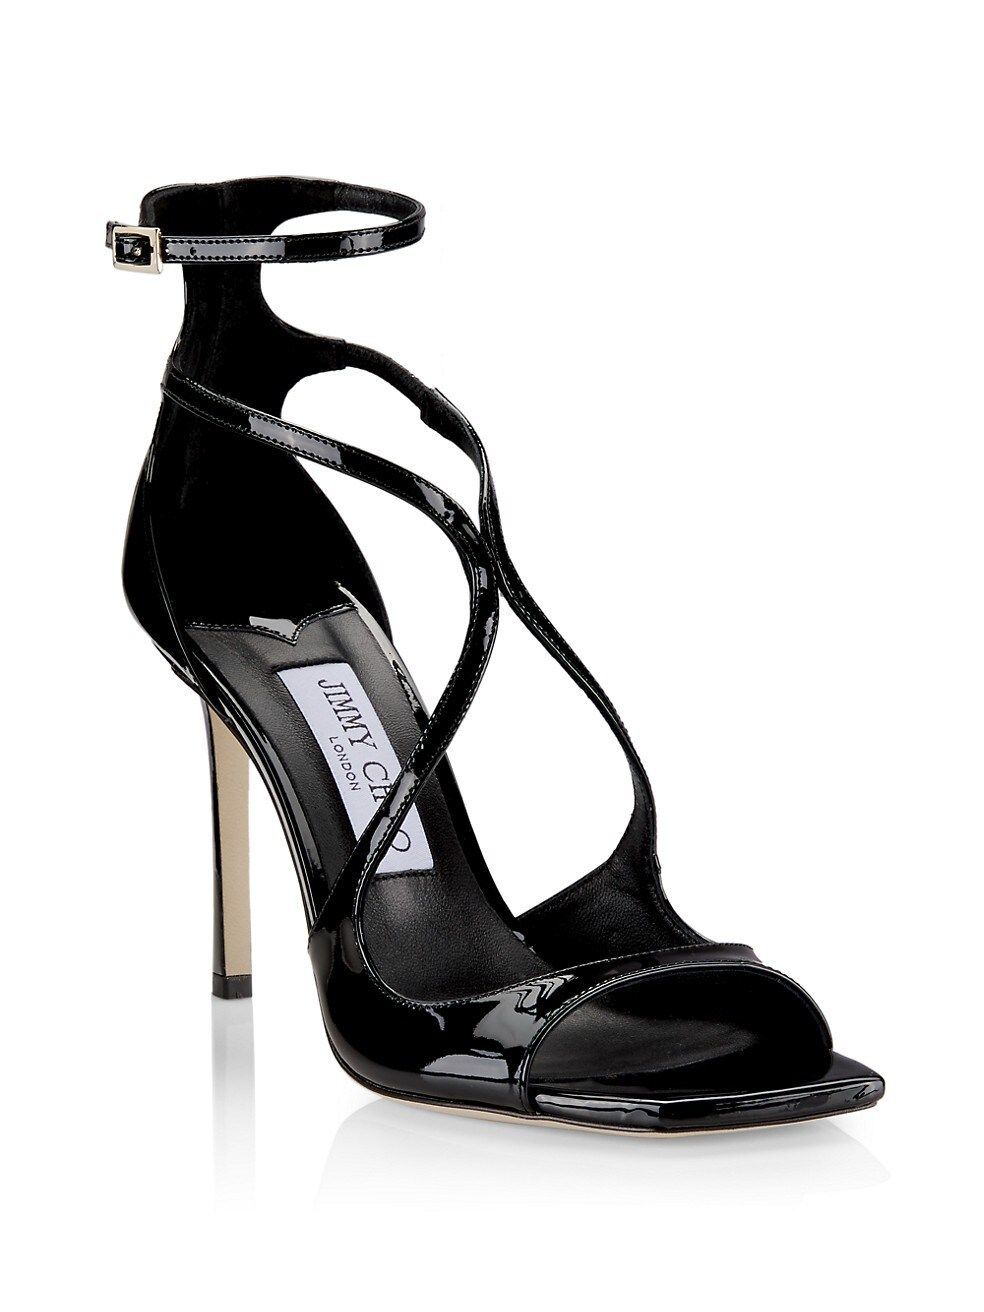 Azia 95MM Patent Leather Sandals | Saks Fifth Avenue